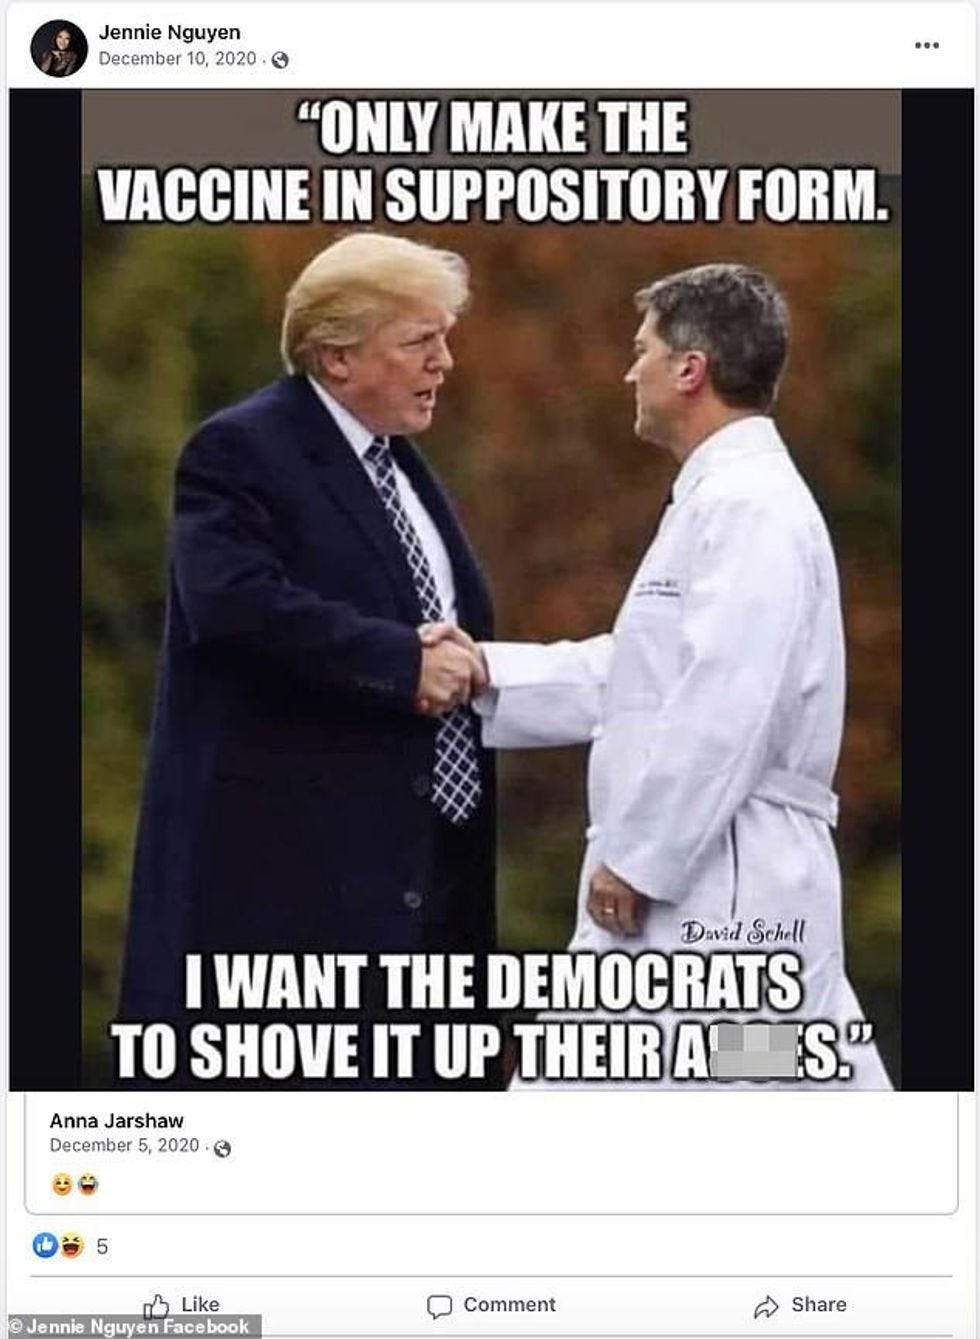 Only make the vaccine in suppository form. I want the Democrats to shove it up their asses. 